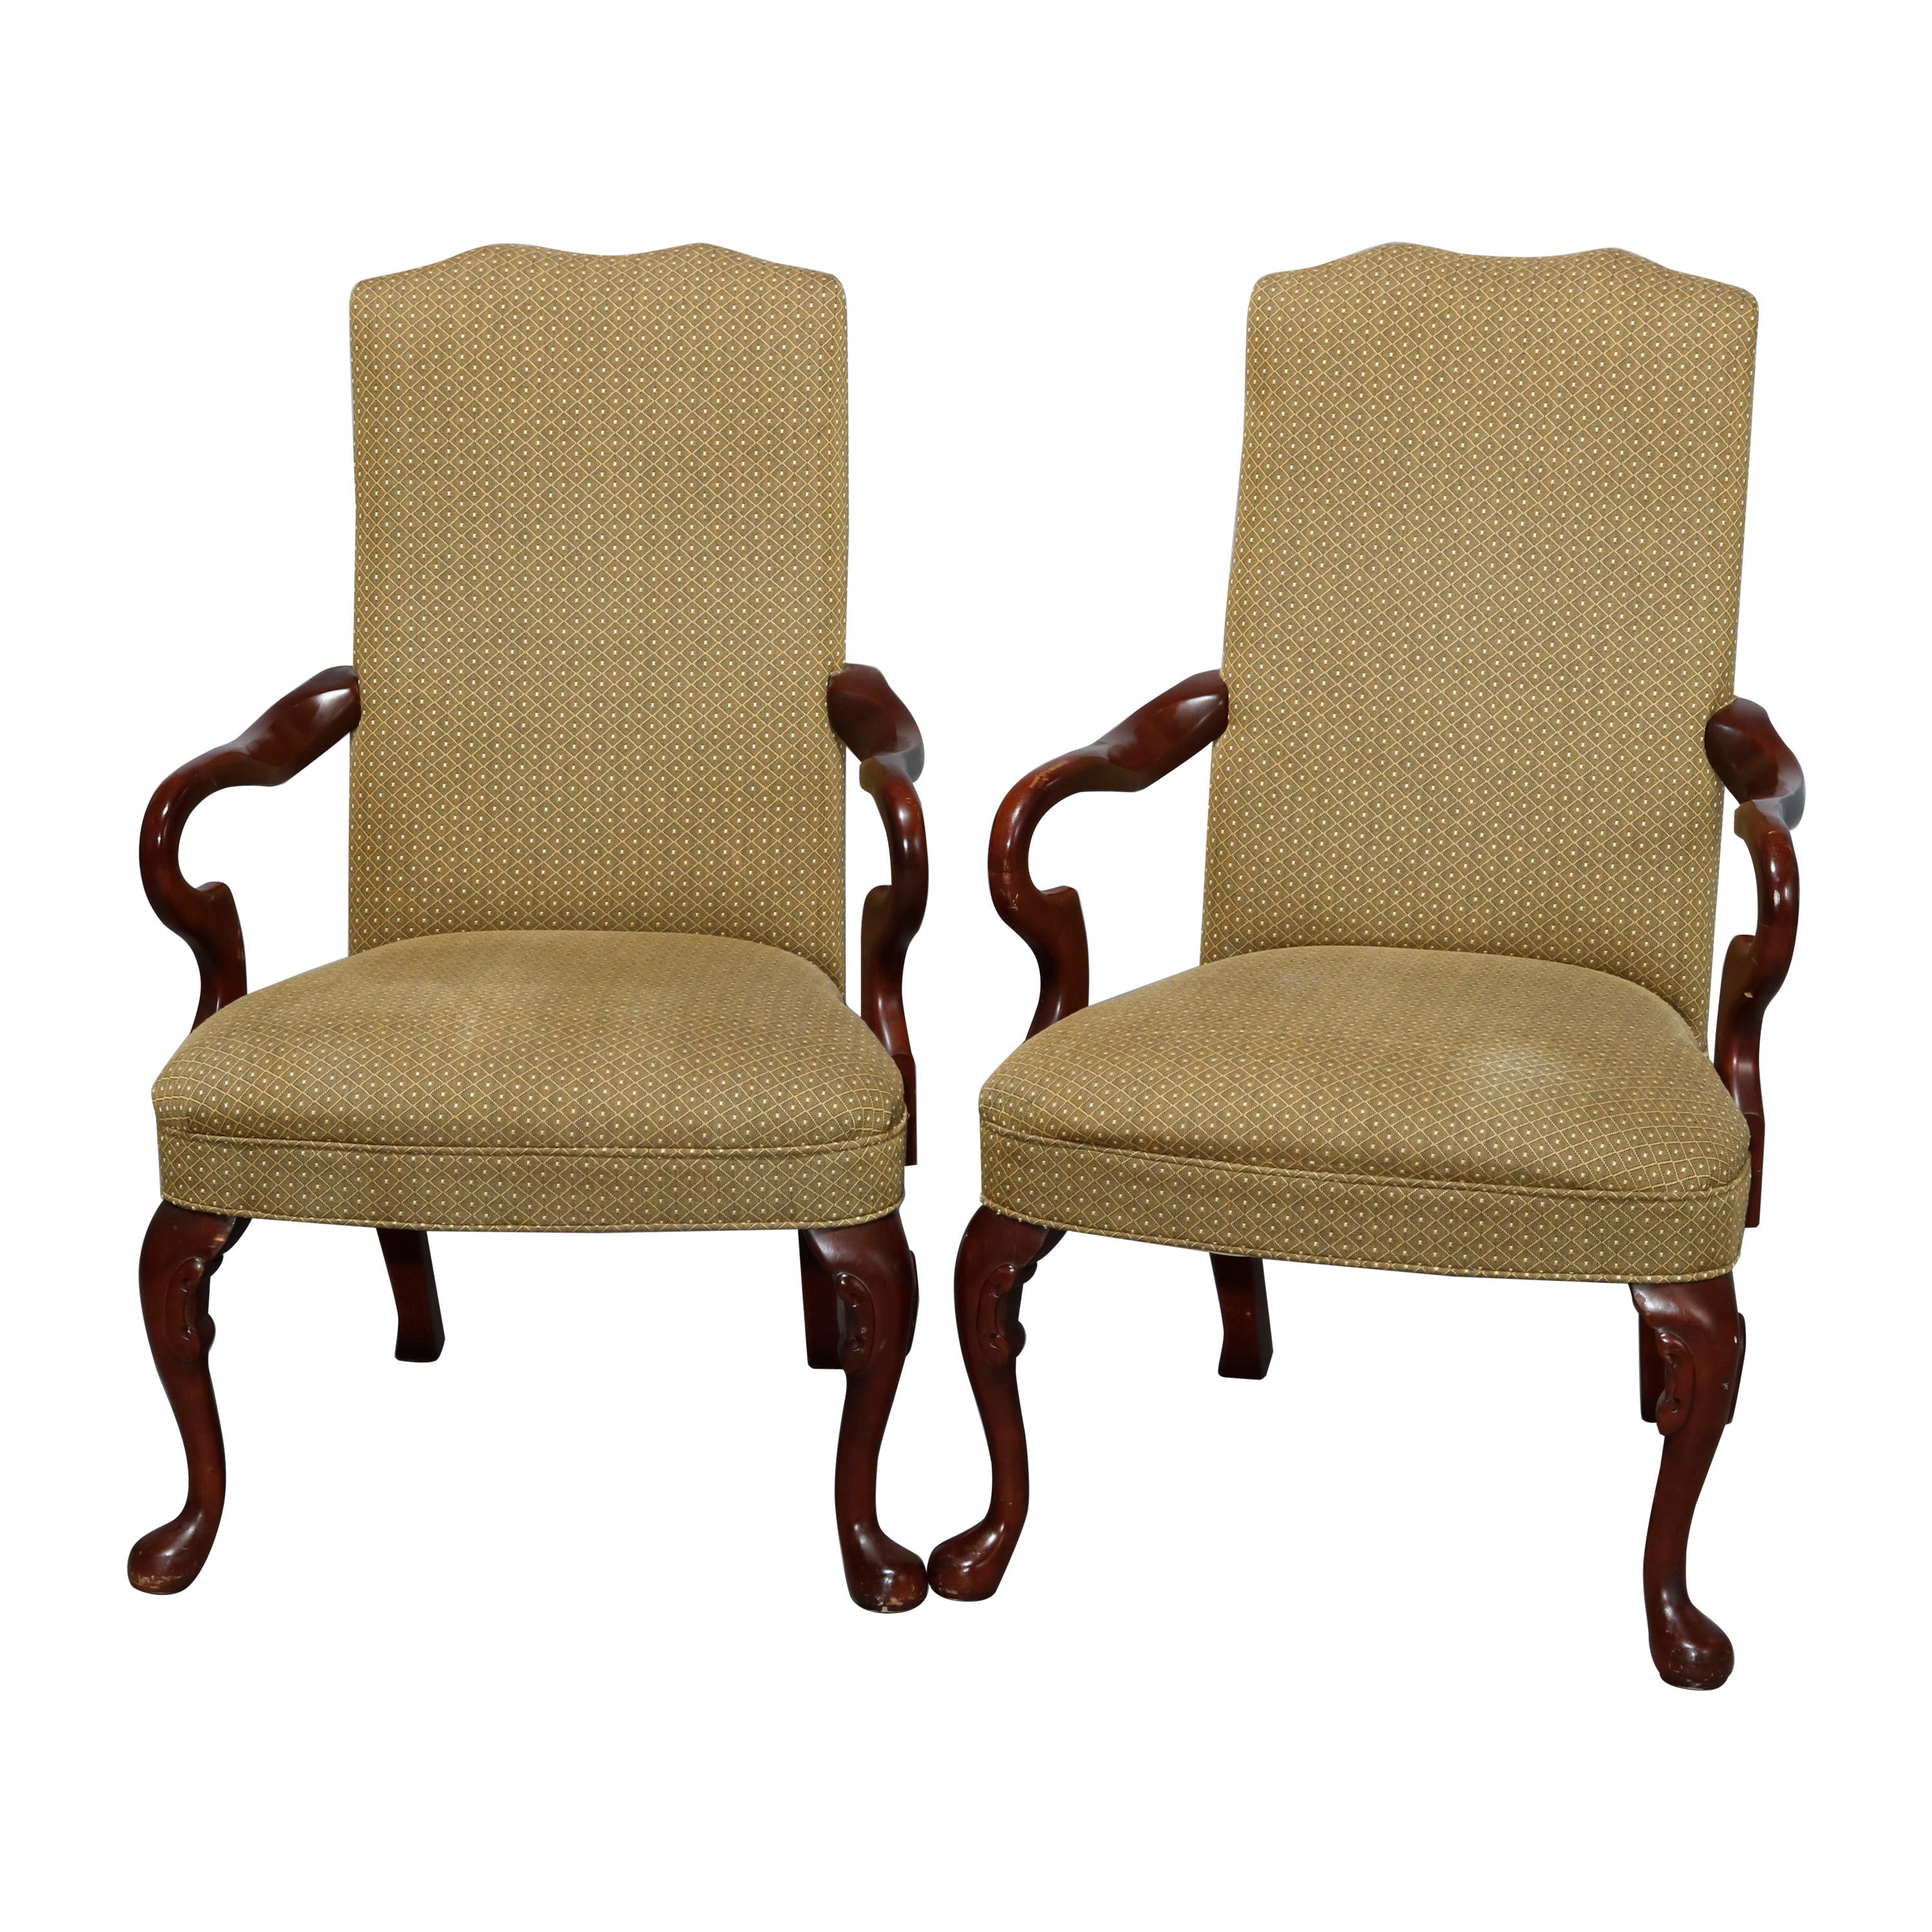 Antique Pair of Queen Anne Style Mahogany Fireside Armchairs, 20th Century